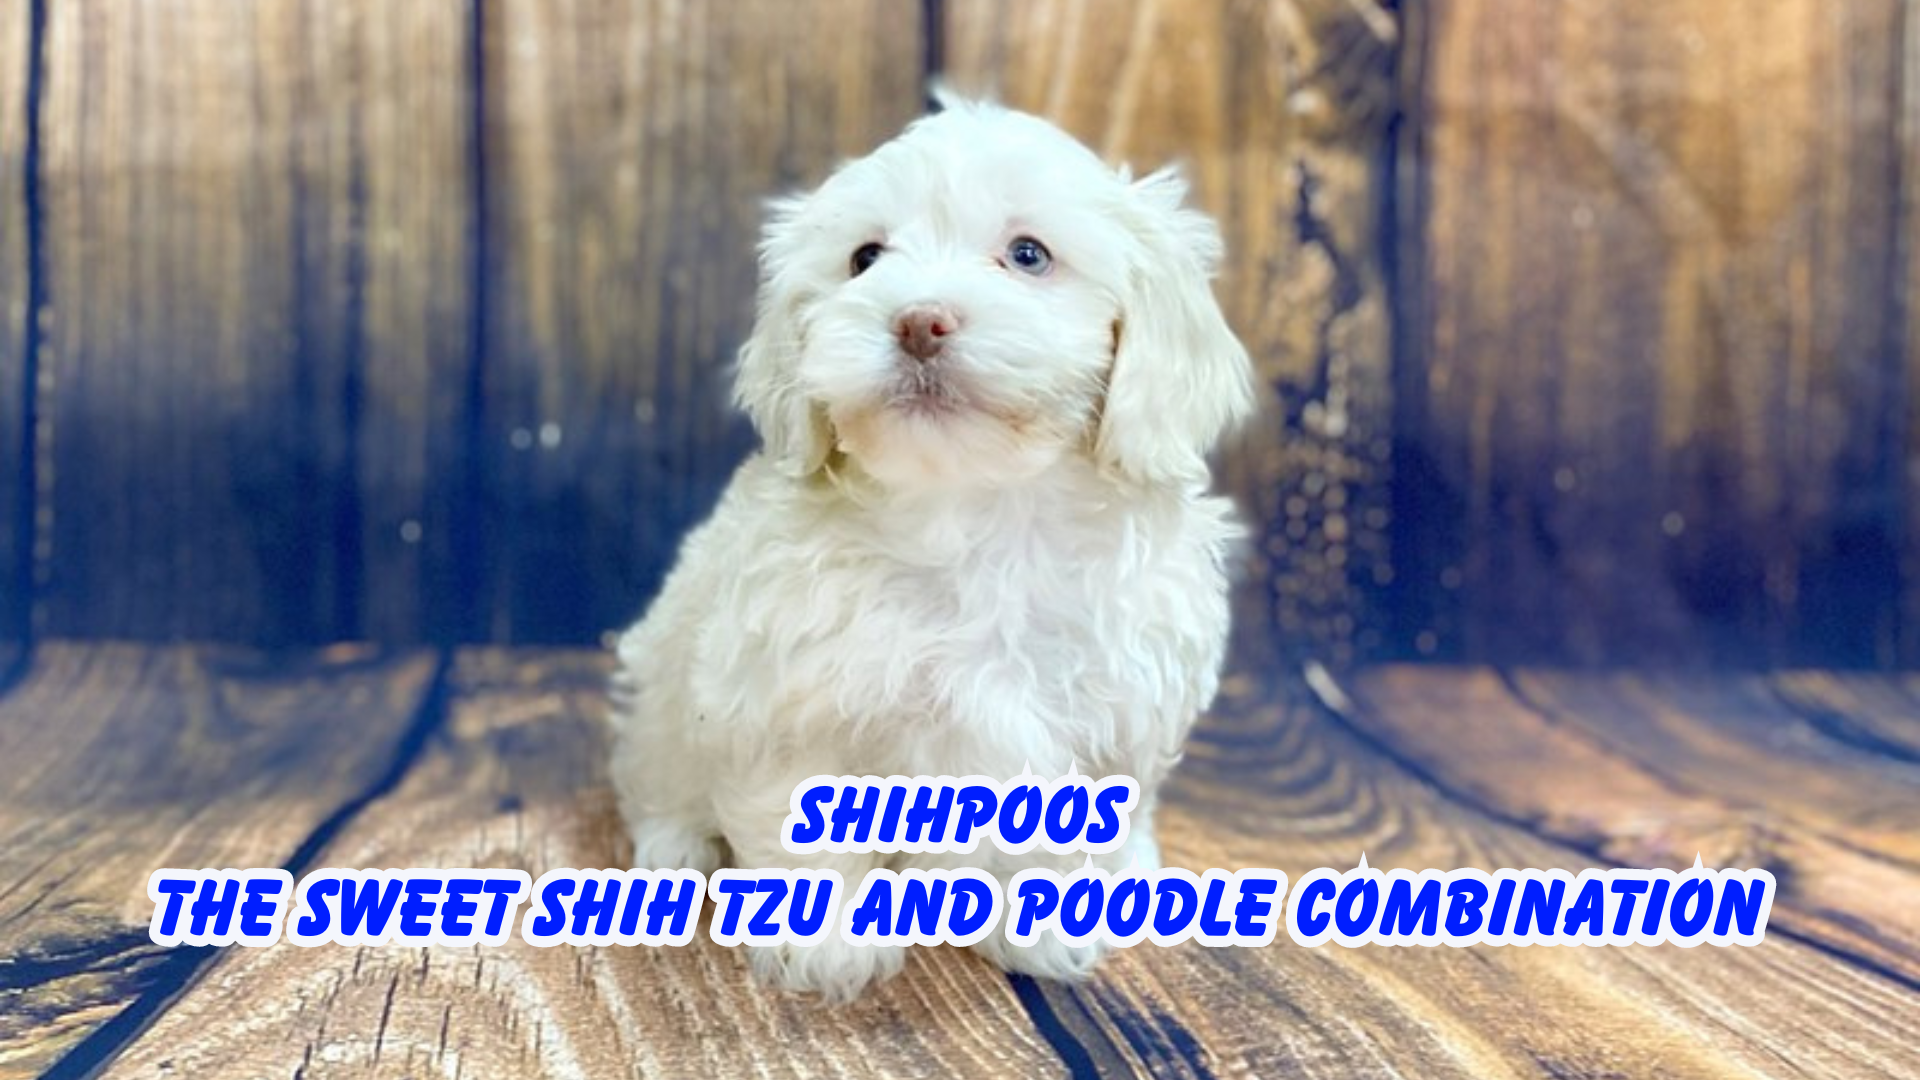 shihpoos